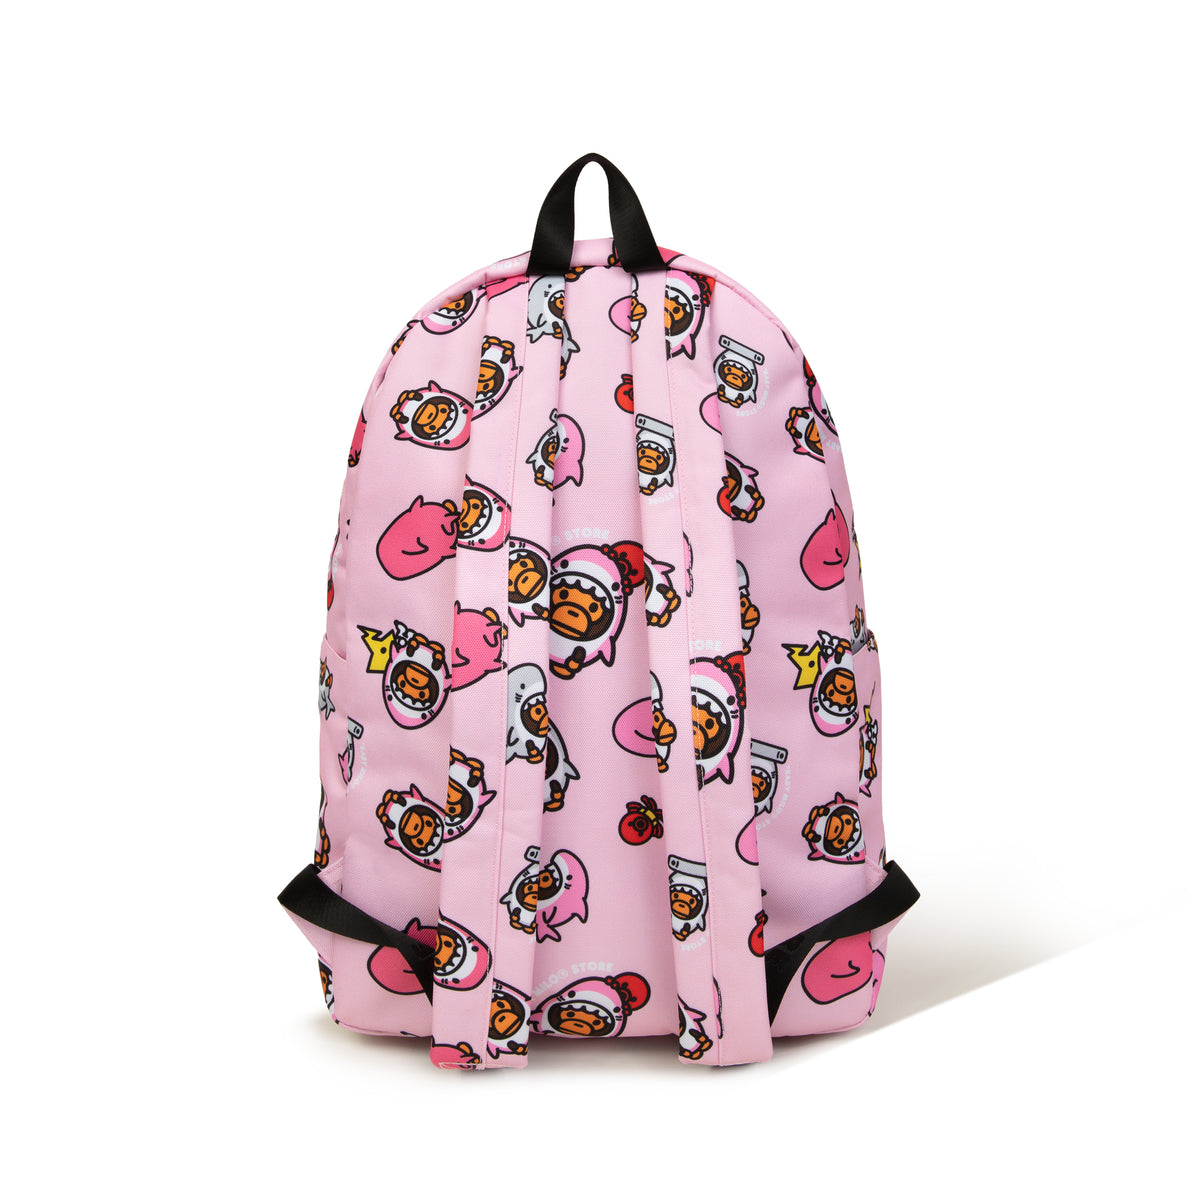 BABY MILO LARGE BACKPACK